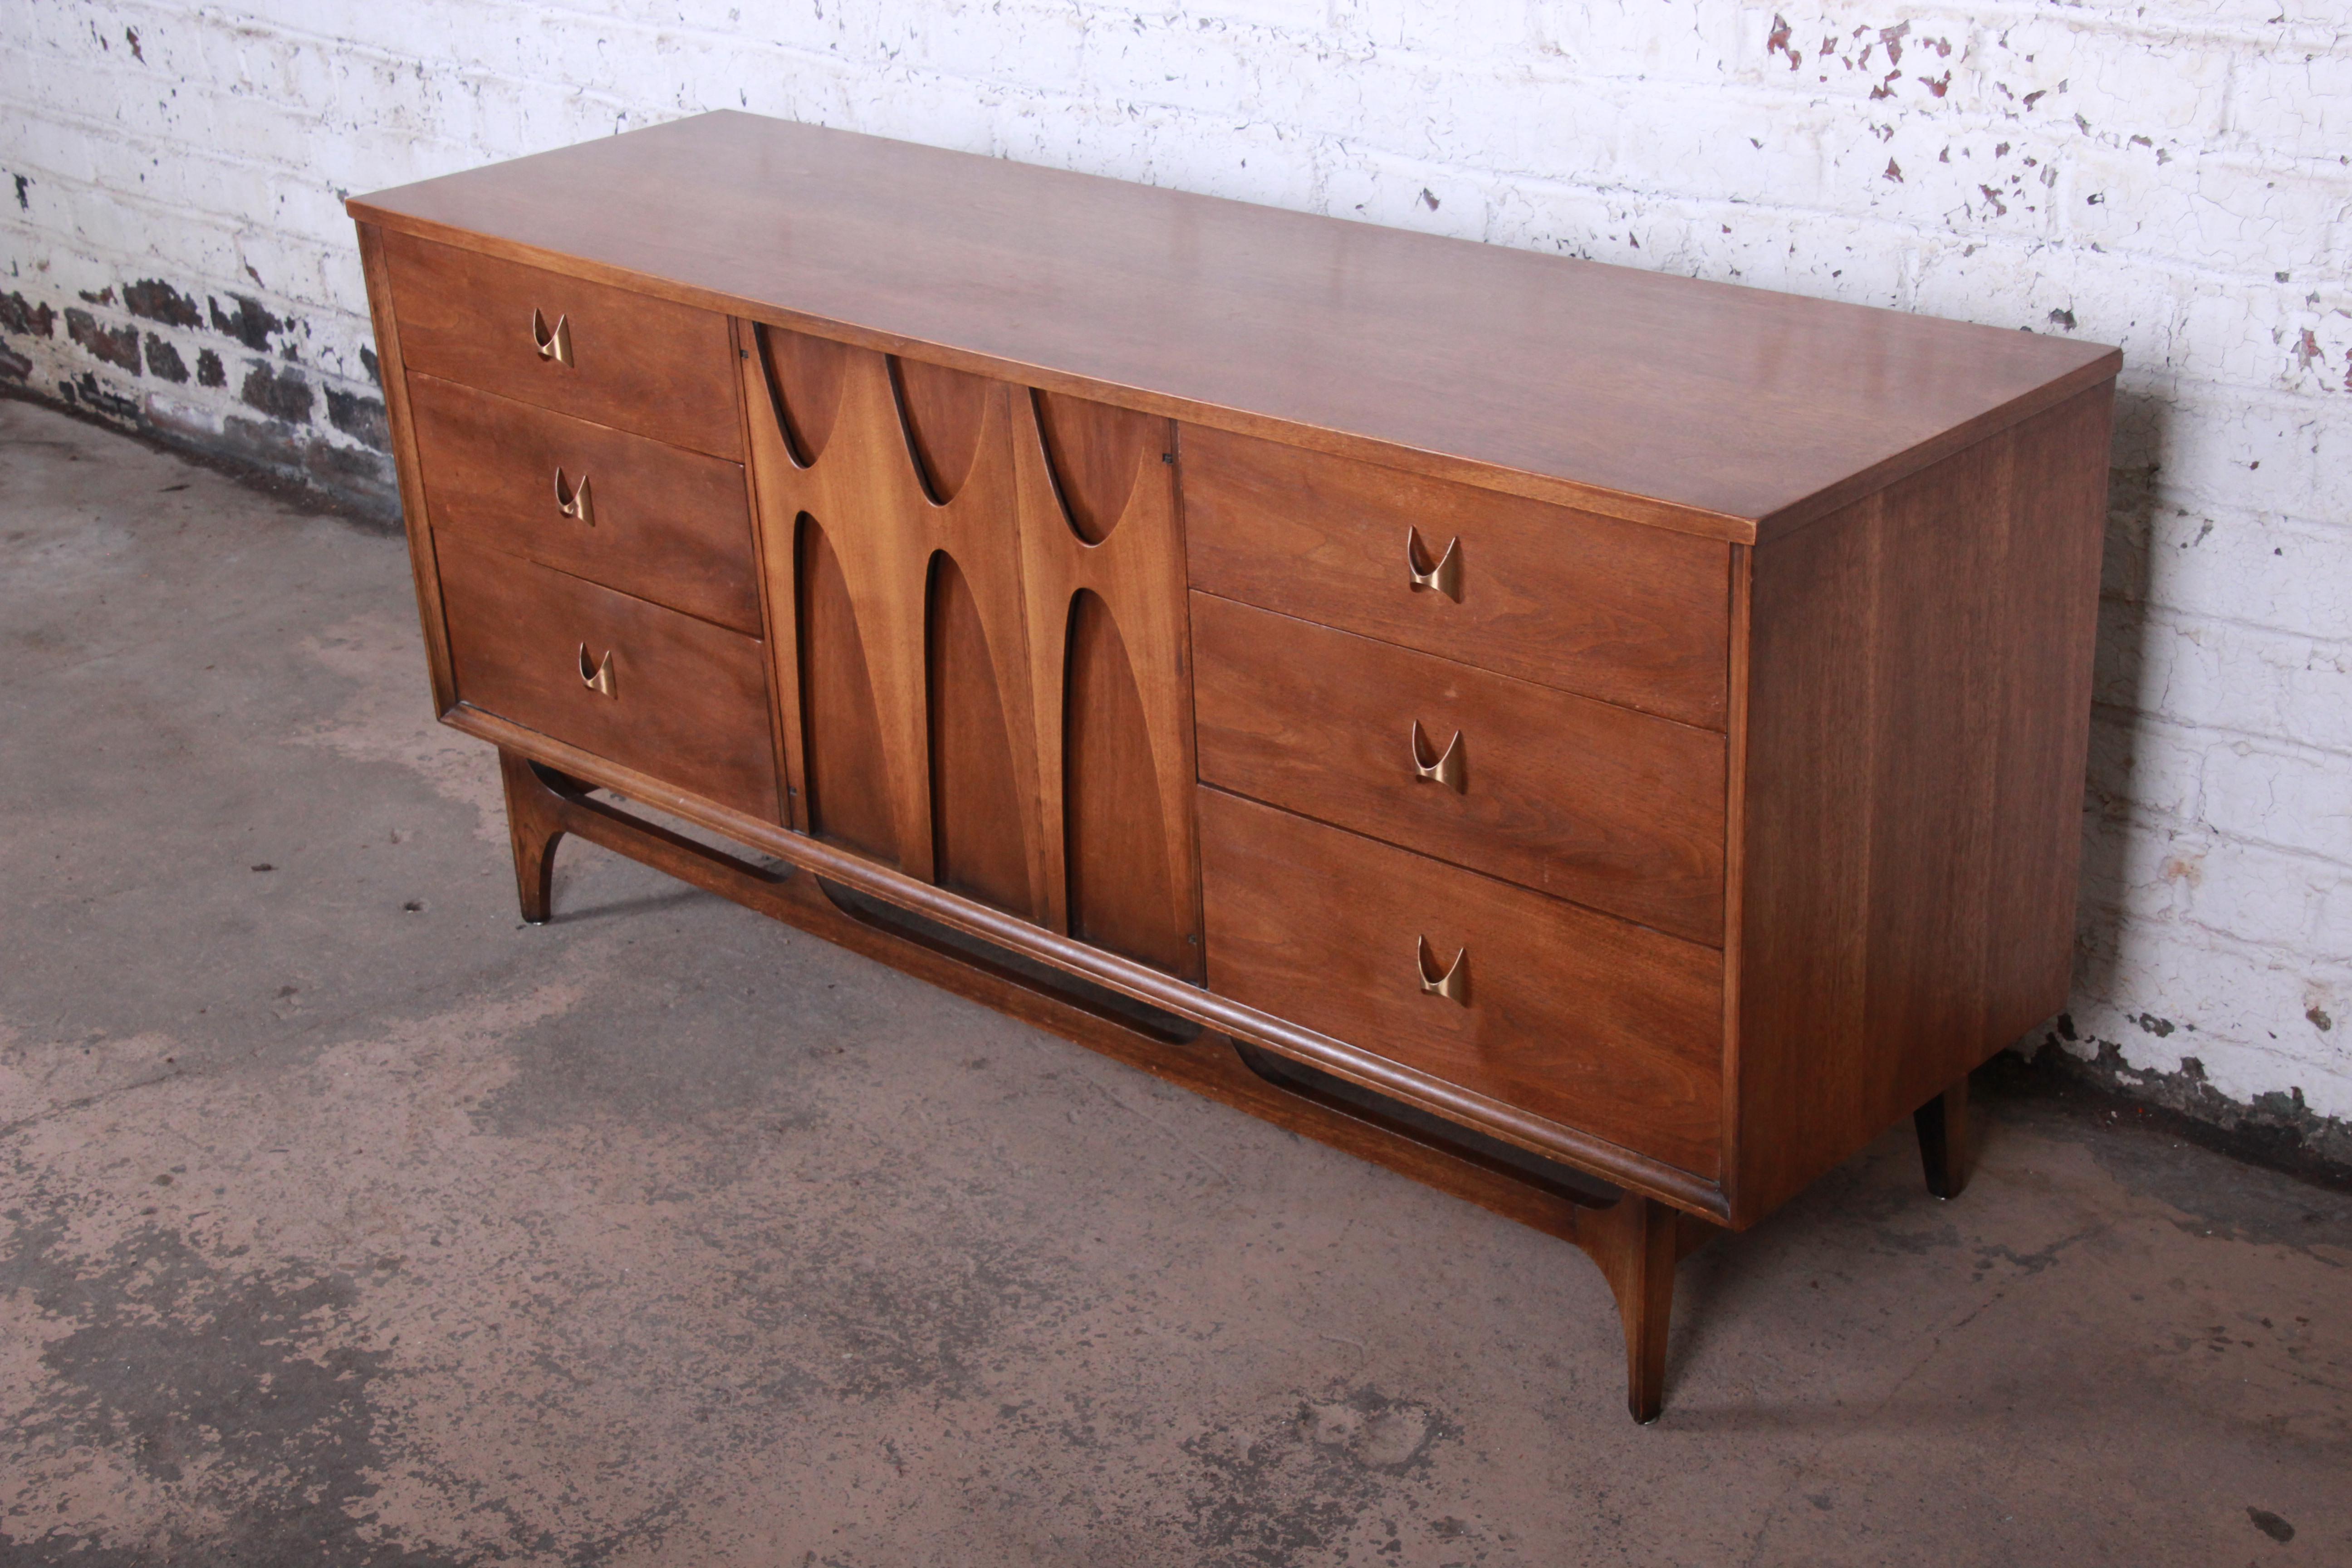 A gorgeous Mid-Century Modern sculpted walnut triple dresser or credenza by Broyhill Brasilia. The dresser features beautiful walnut wood grain, with a unique sculpted design and iconic sculpted arch brass drawer pulls. It offers ample storage, with